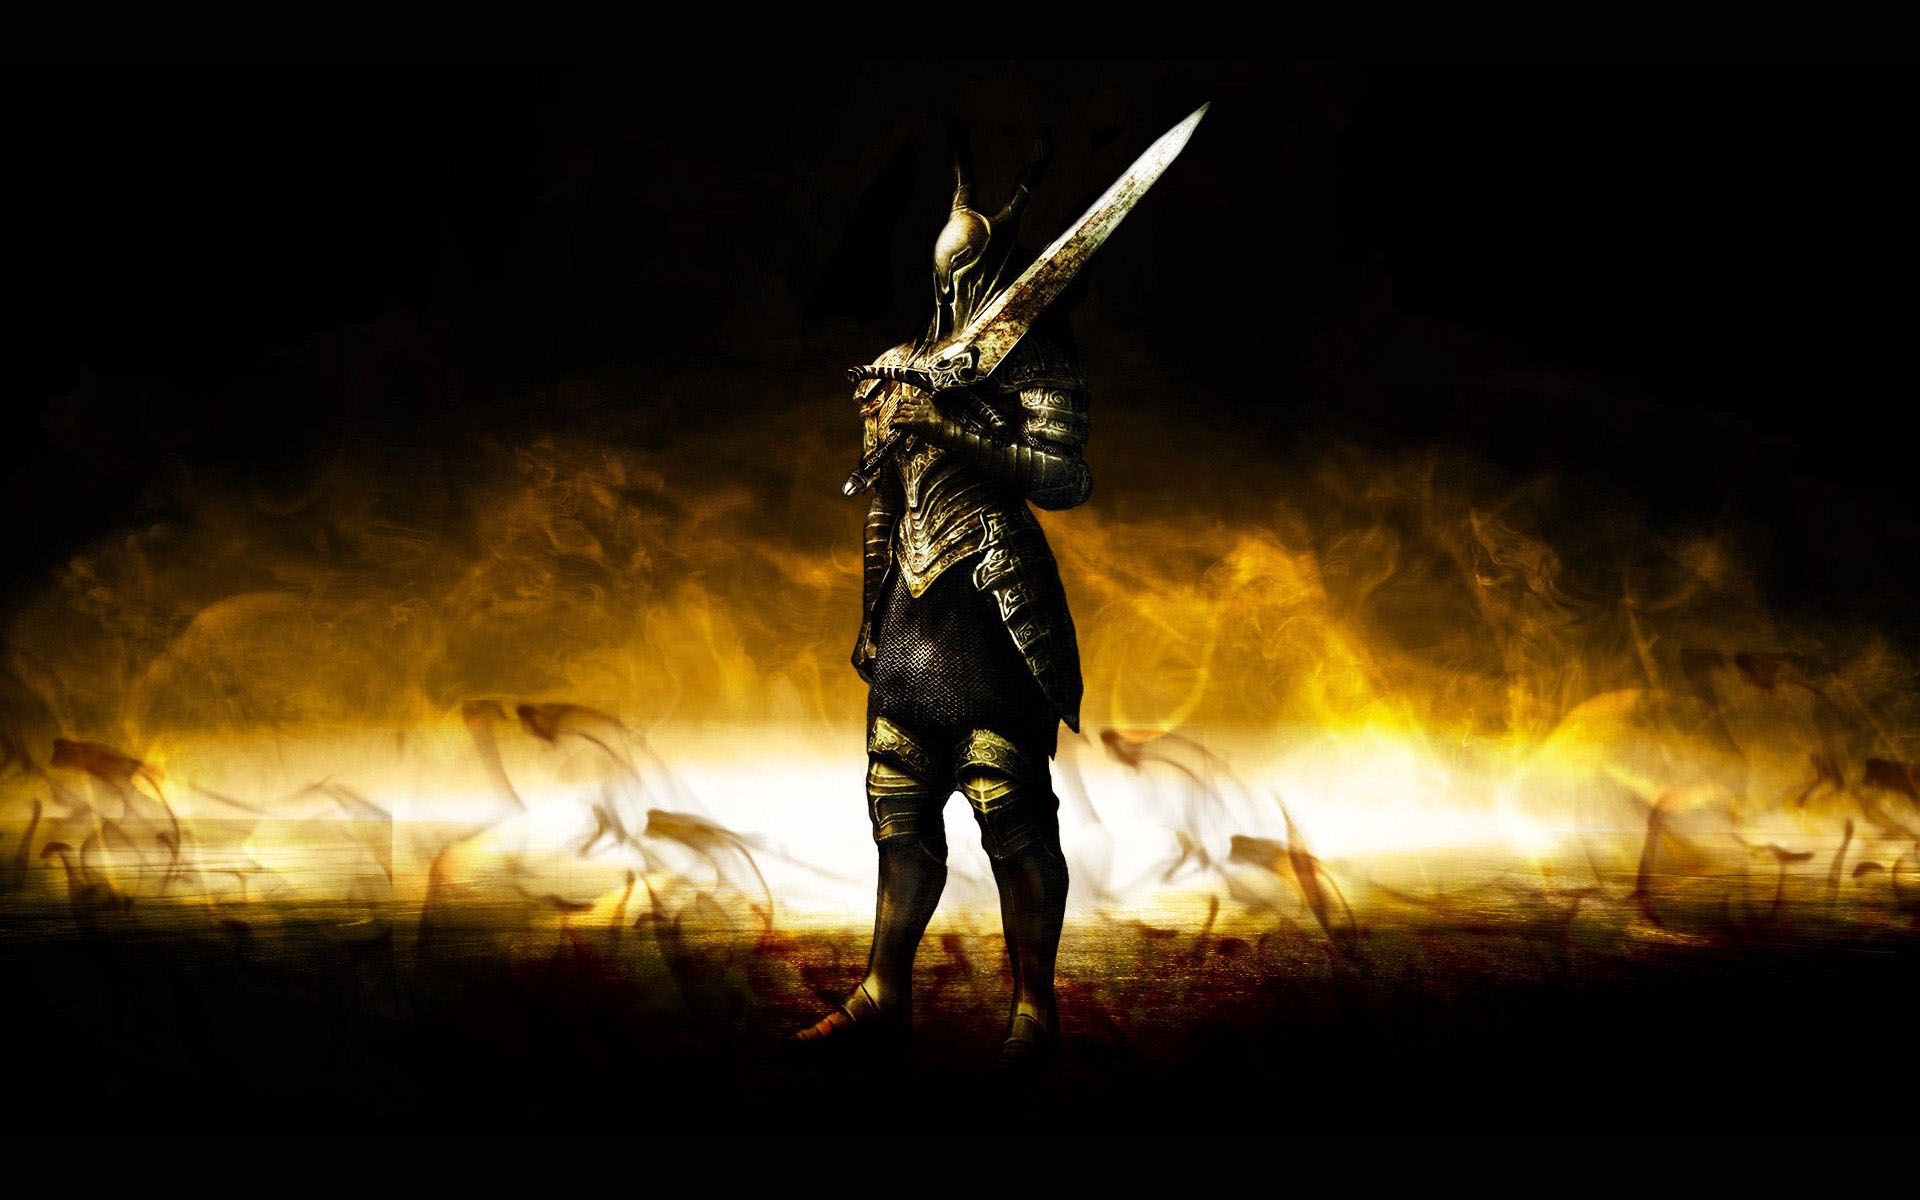 Find The Dark Souls HD Wallpaper Which Is Now Available For Game